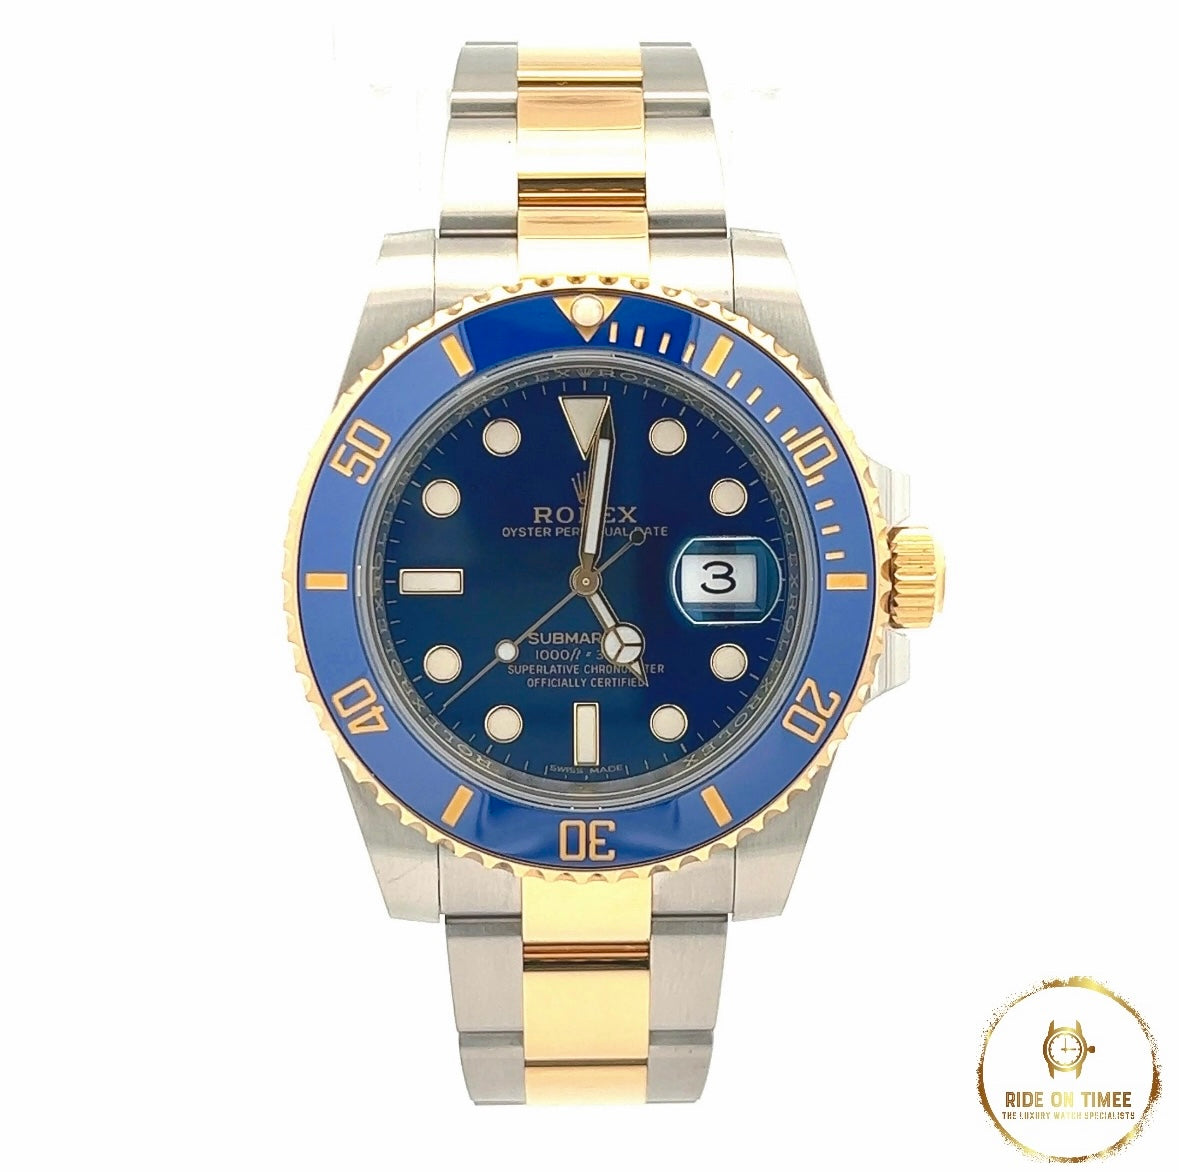 Rolex Submariner Date 40mm Blue Kit ‘116613LB’ - Ride On Timee